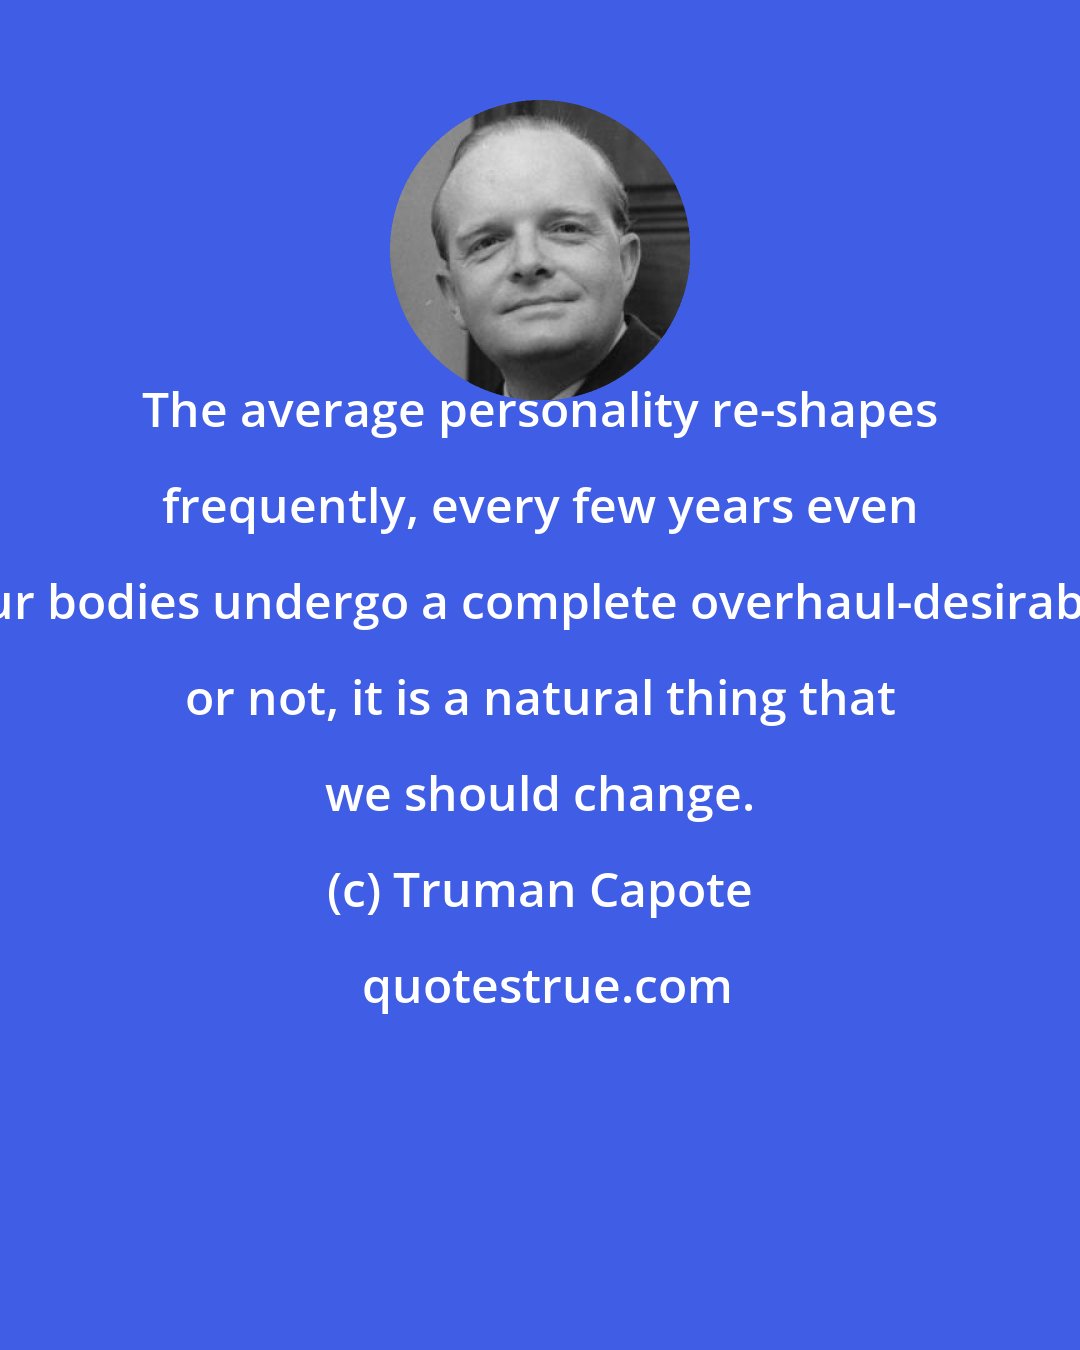 Truman Capote: The average personality re-shapes frequently, every few years even our bodies undergo a complete overhaul-desirable or not, it is a natural thing that we should change.